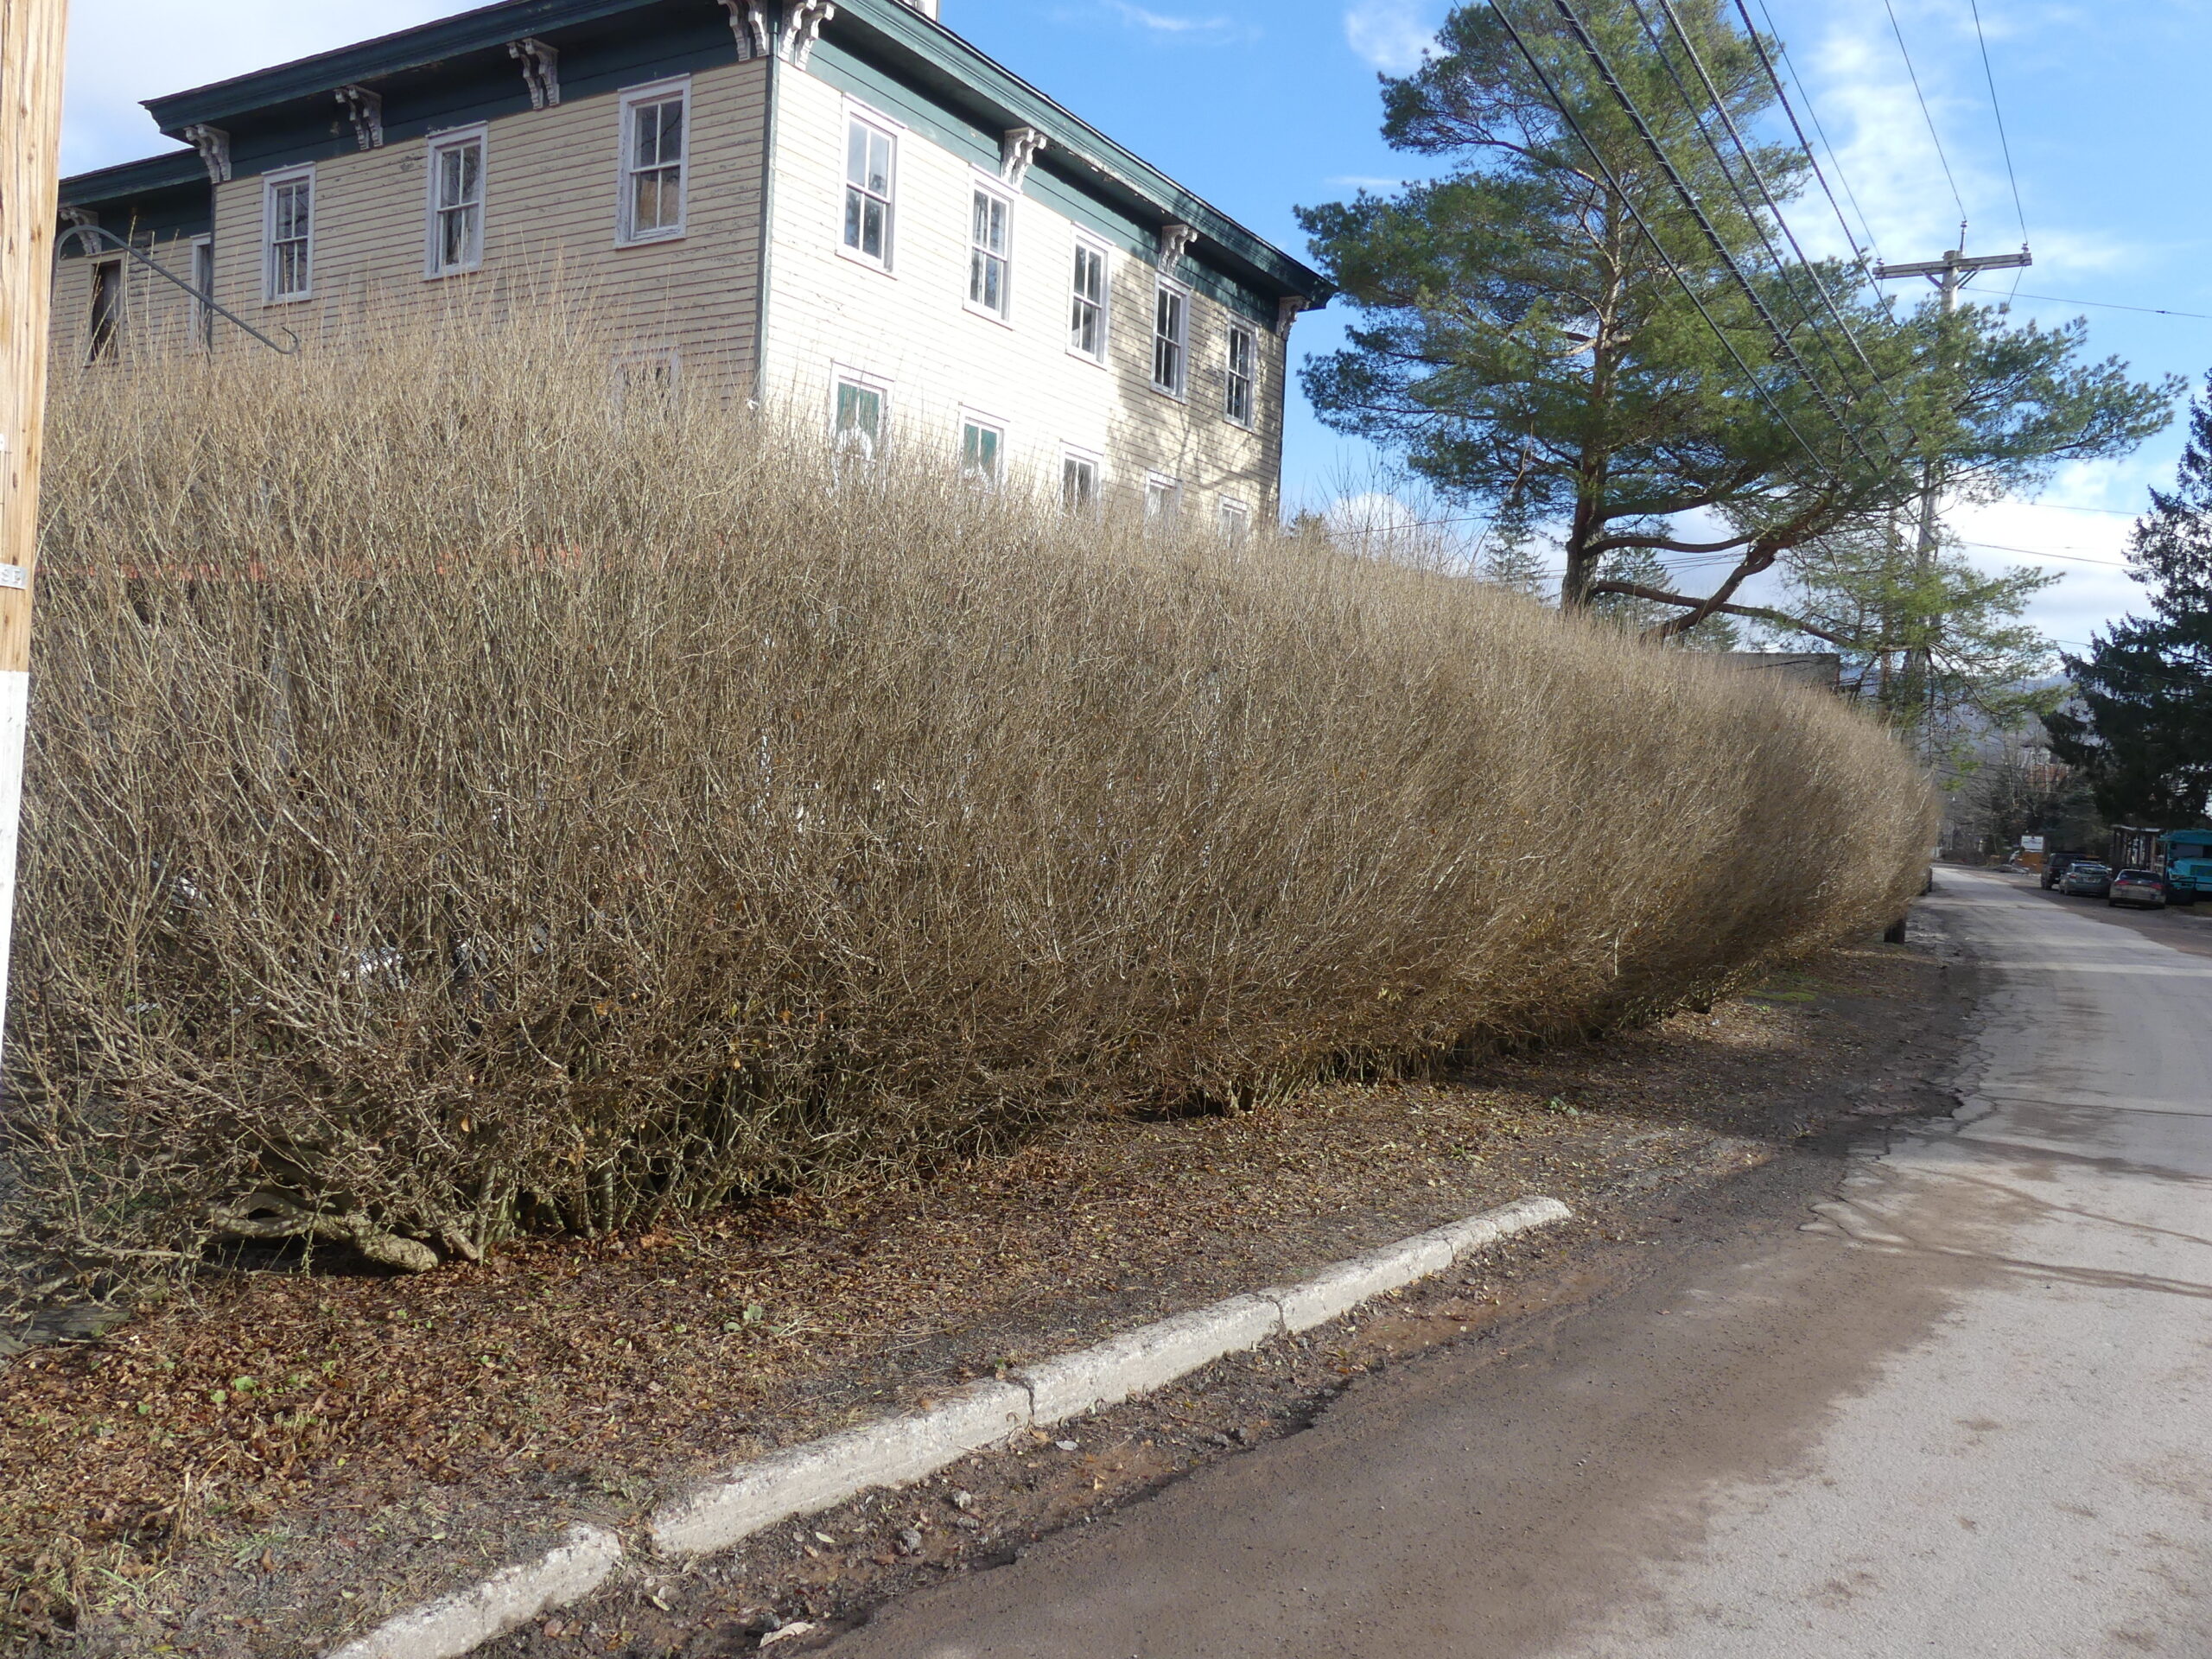 Winter is a great time to do serious work on overgrown privet hedges. Here an old privet hedge in front of a historic hotel that’s about to be renovated to its 1850s splendor. The 8-foot-tall-by-six-foot-wide hedge will be reduced to 3 feet tall and 3 feet wide then further rejuvenated. Stay tuned. ANDREW MESSINGER